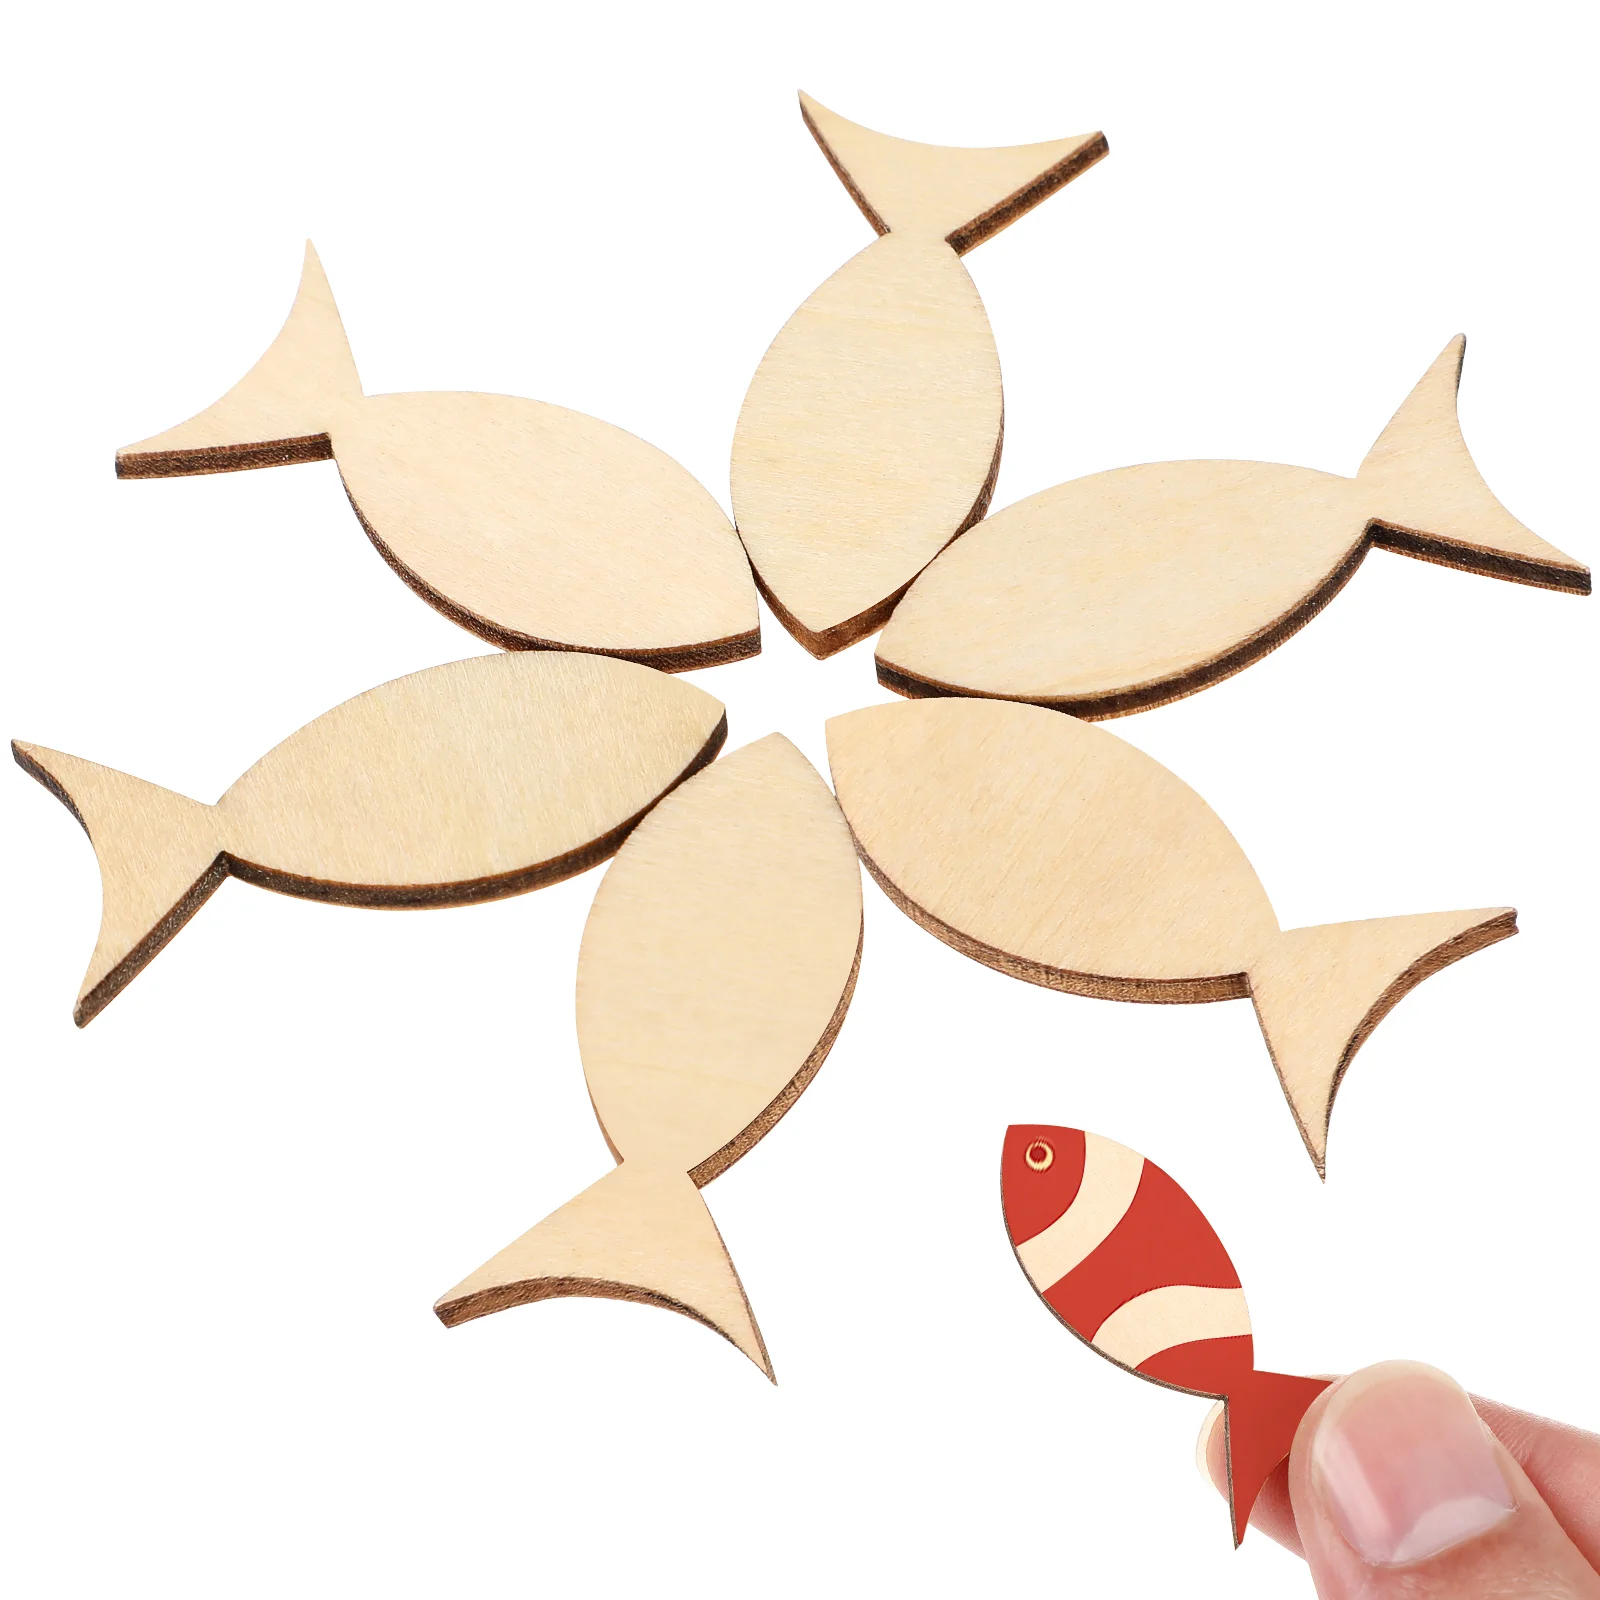 

100 Pcs Wooden Solid Fish Unfinished Slices Crafts Card Gift Tags Ship Ornaments Chip Embellishments Shapes Crafting Animals